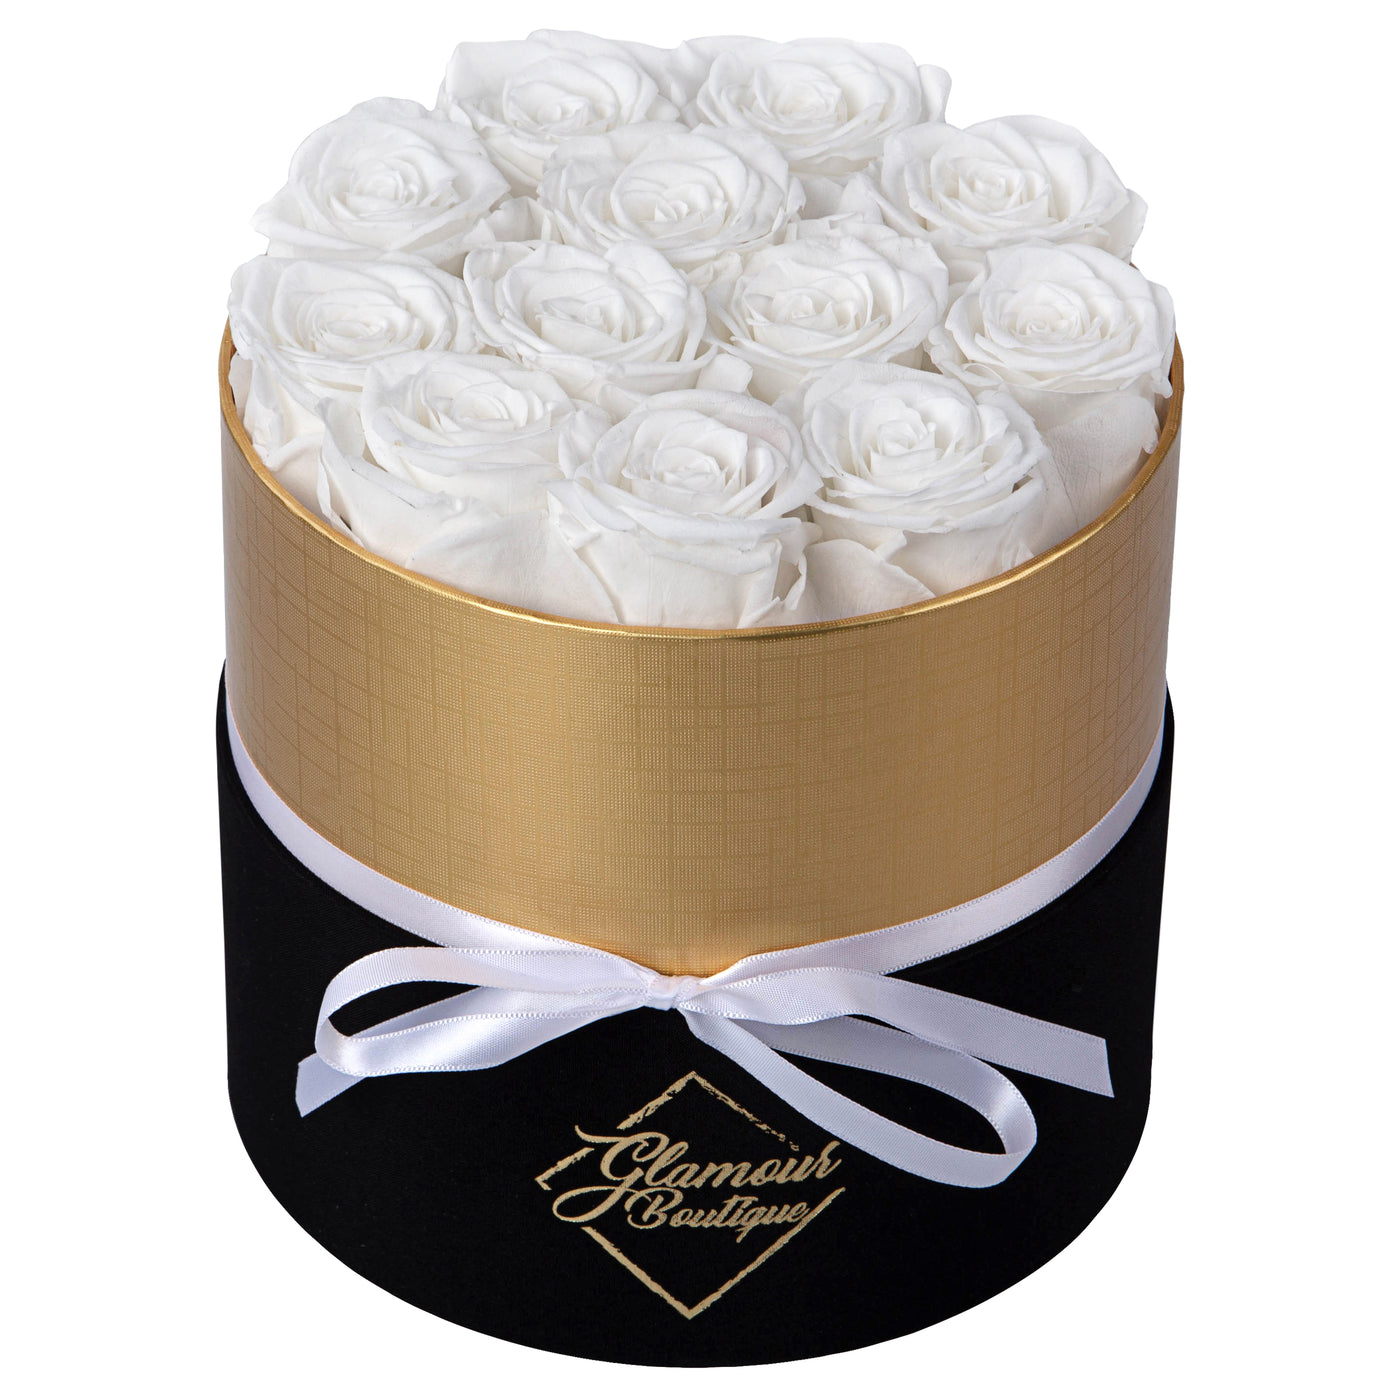 12 Preserved Real Roses in Round Black & Gold Box - White